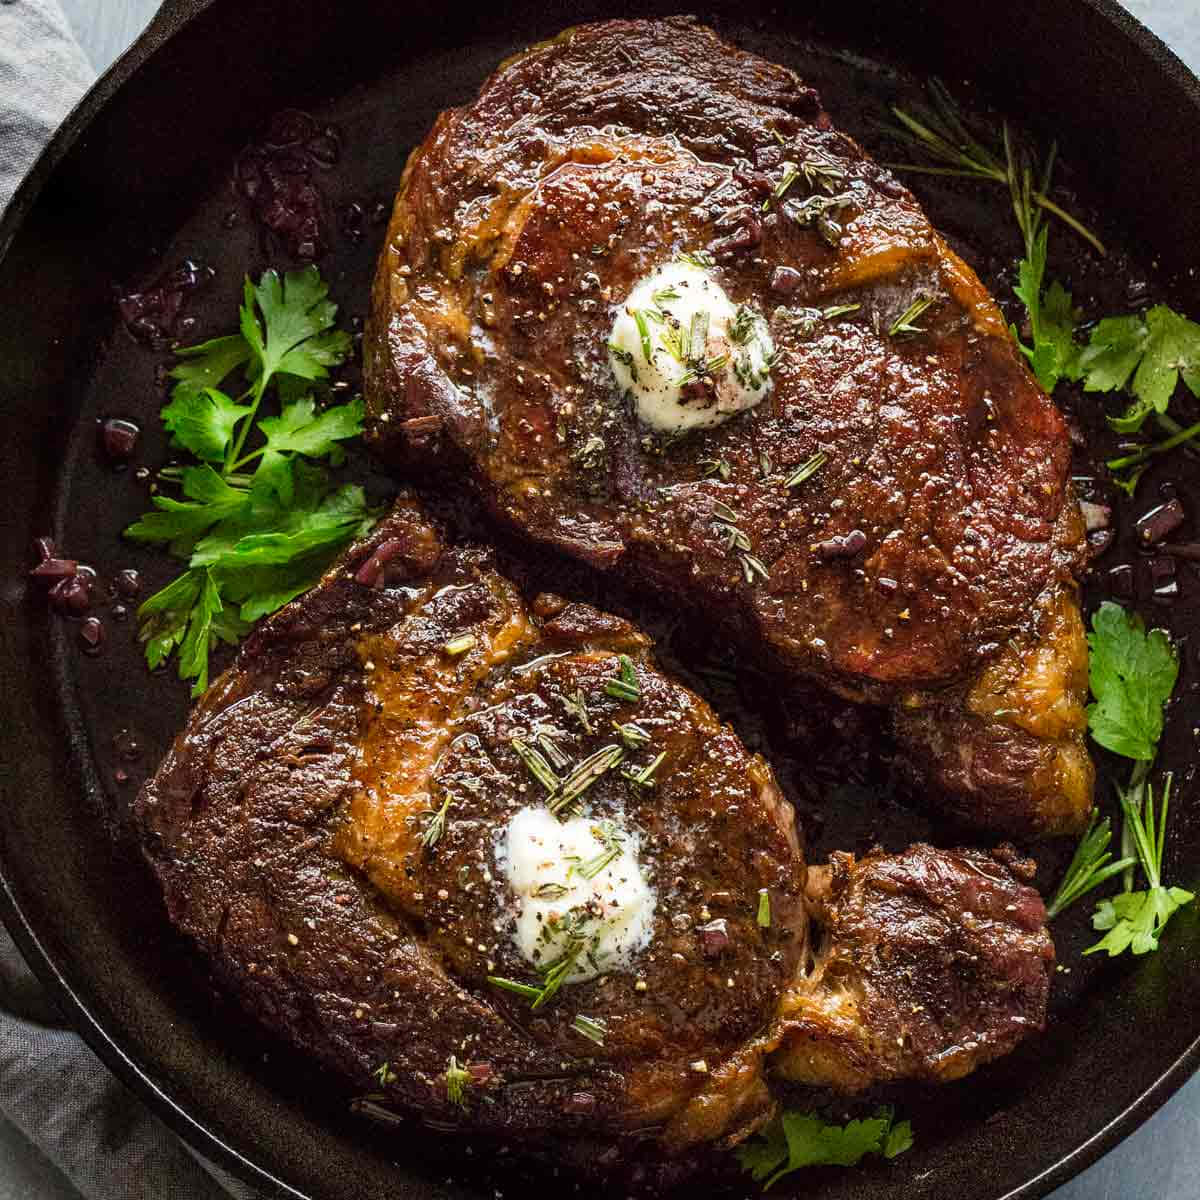 Two Steaks In A Skillet With Herbs And Sour Cream